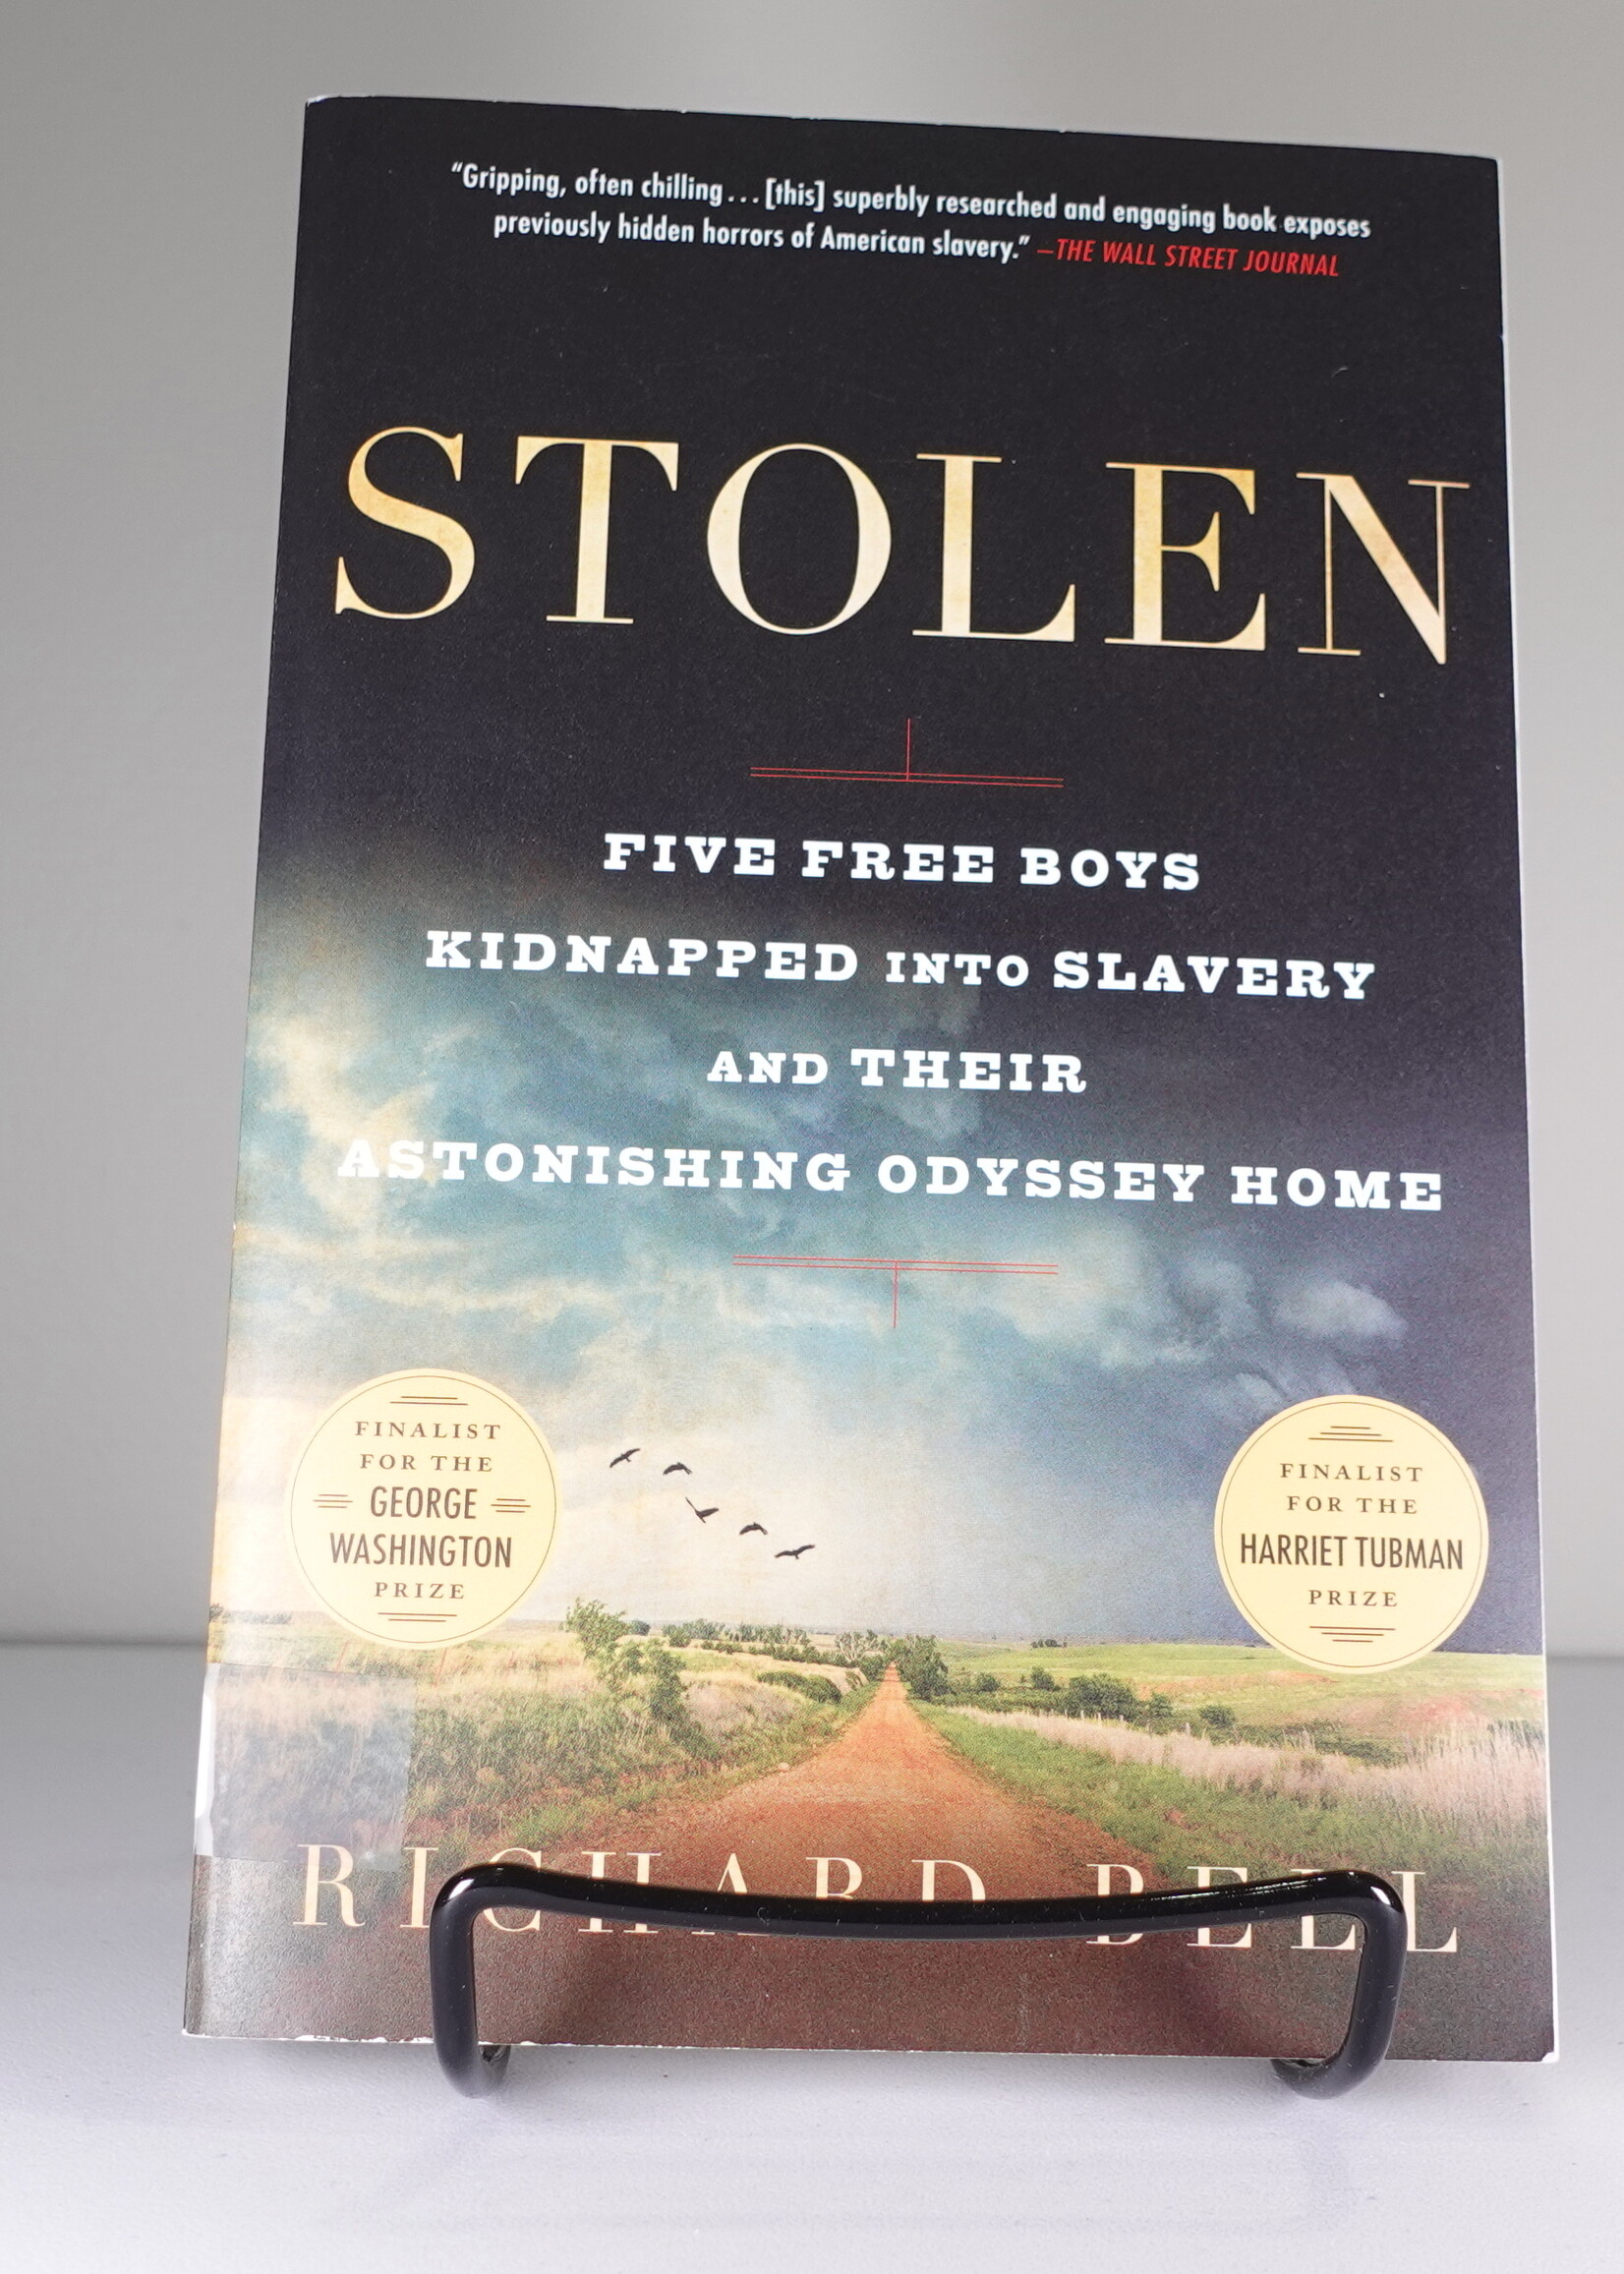 Simon & Schuster Stolen: Five Free Boys Kidnapped Into Slavery and Their Astonishing Odyssey Home